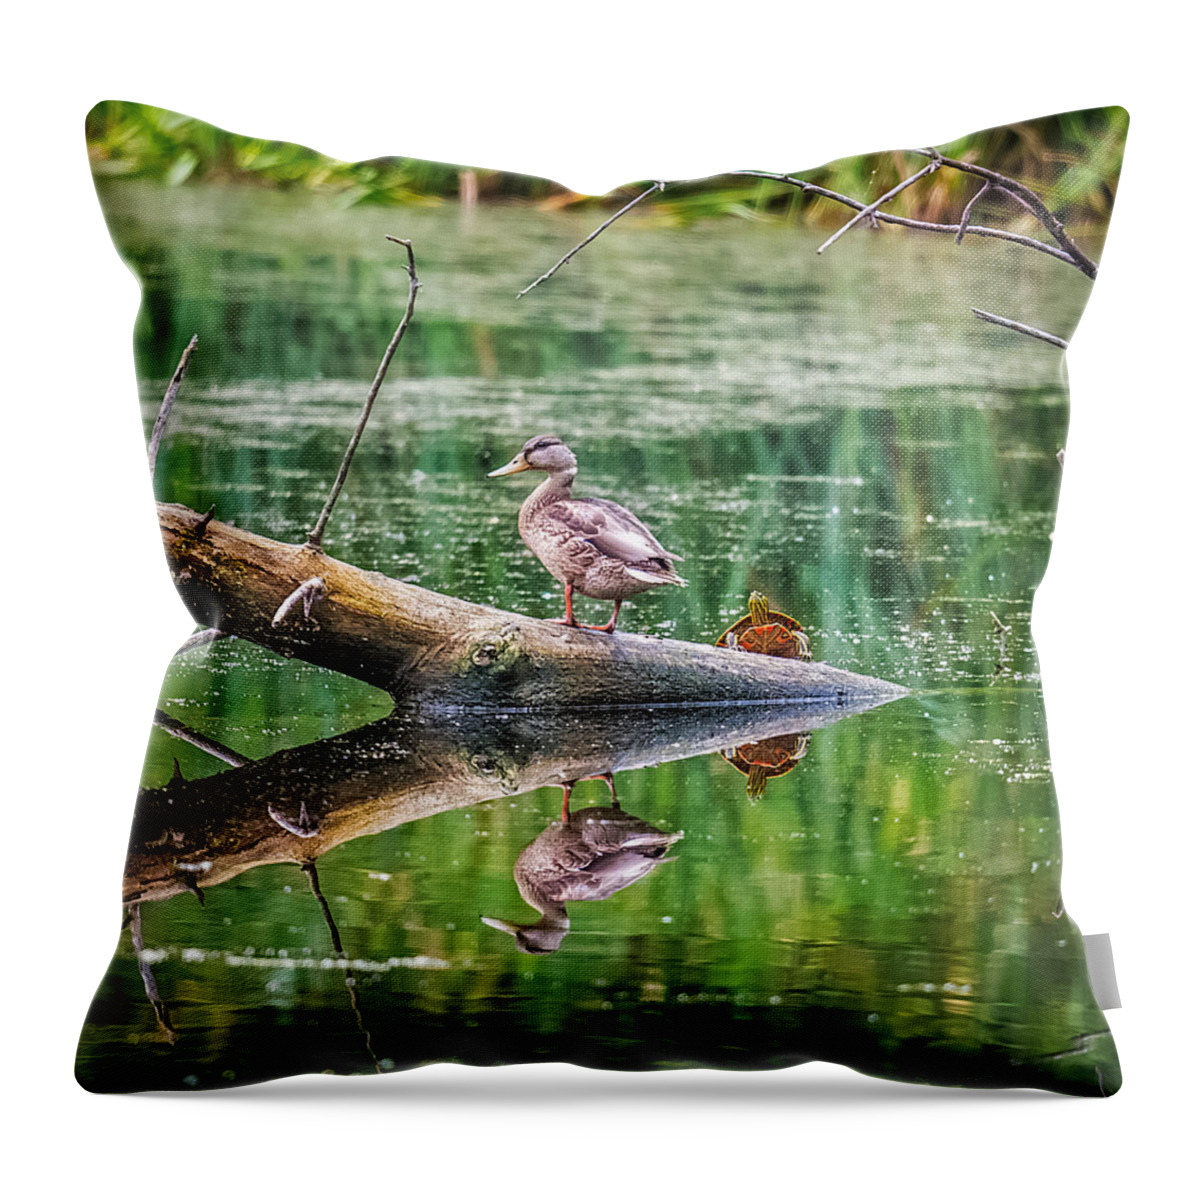 Reflection Throw Pillow featuring the photograph Does This Make My Tail Look Big by Paul Freidlund